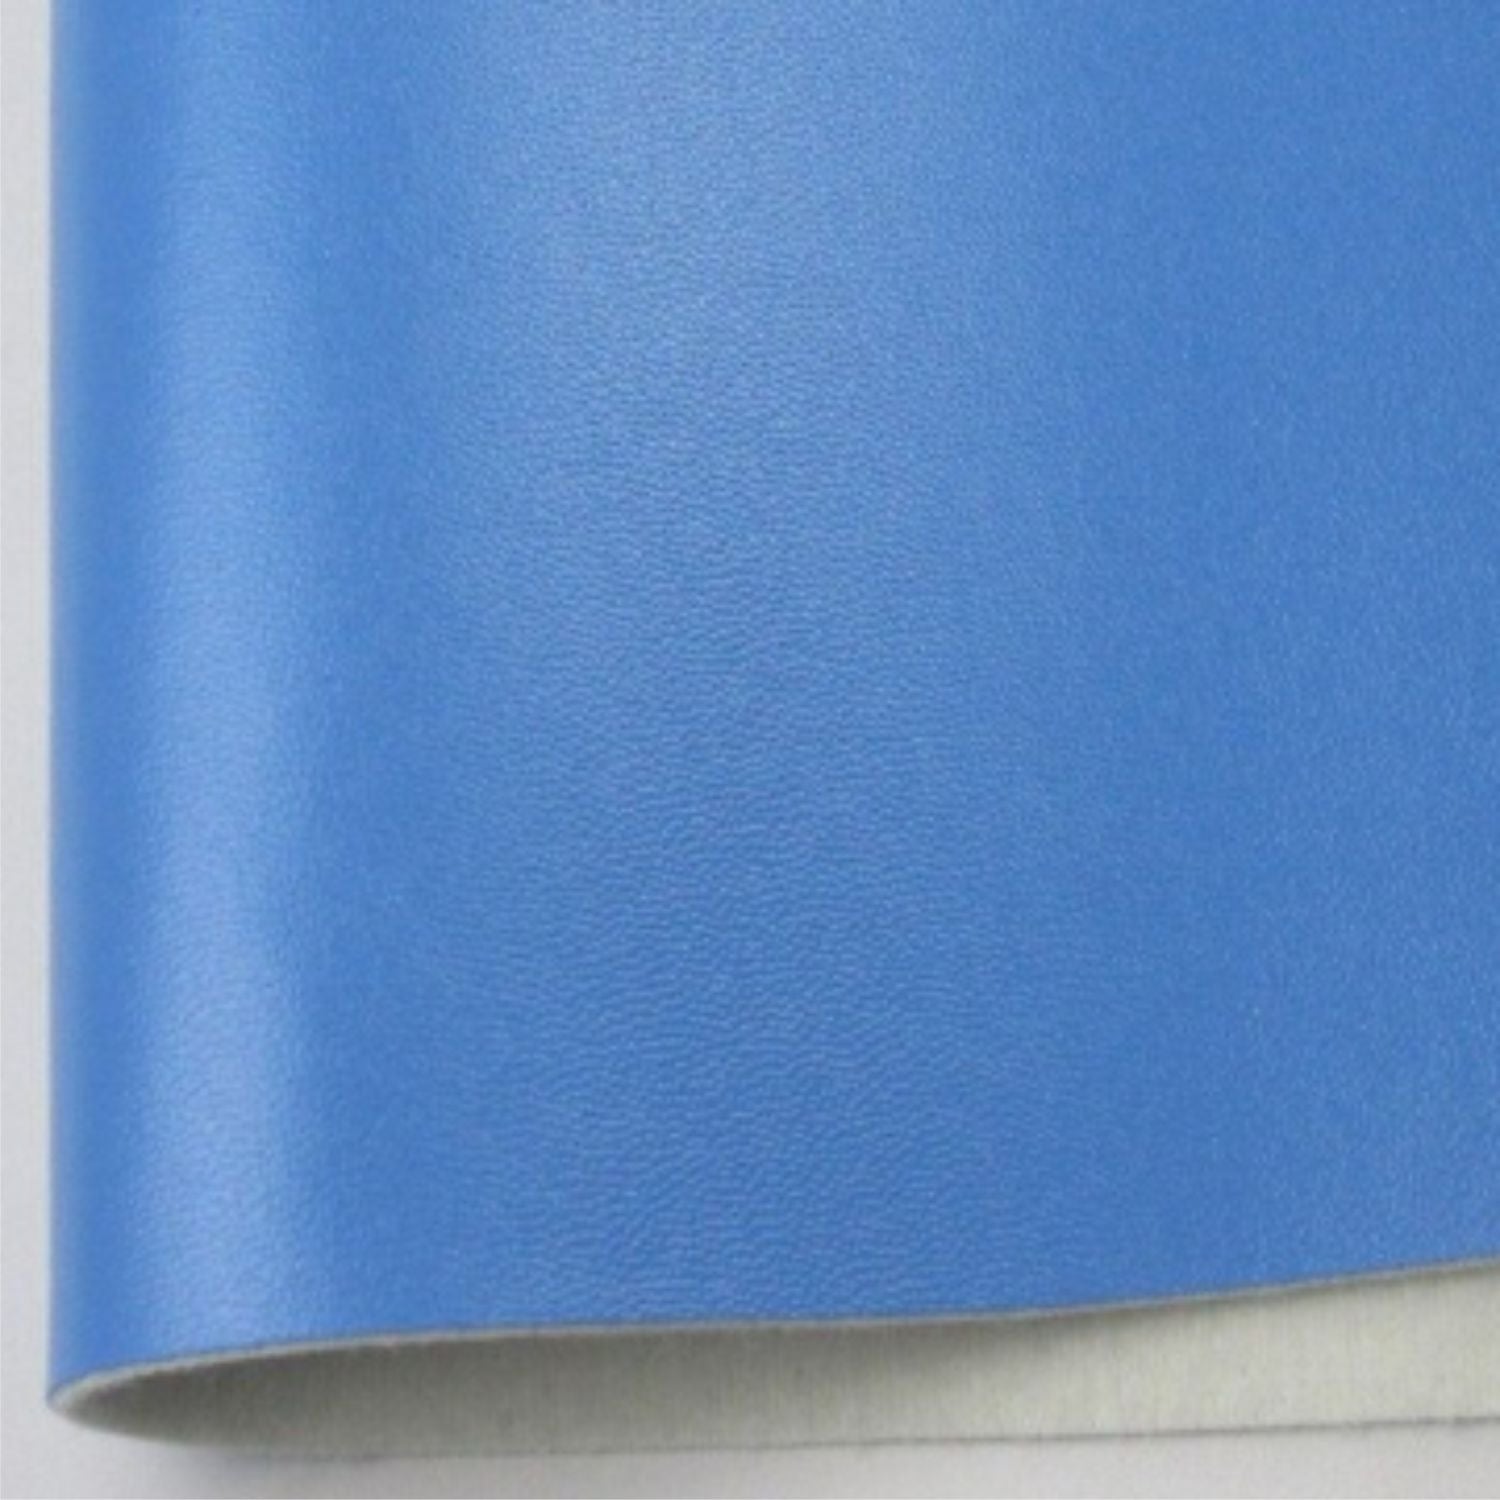 Sky Blue Smooth Fabric Synthetic Faux PU Leather 11.75in x 12in Sheets - CraftCutterSupply.com